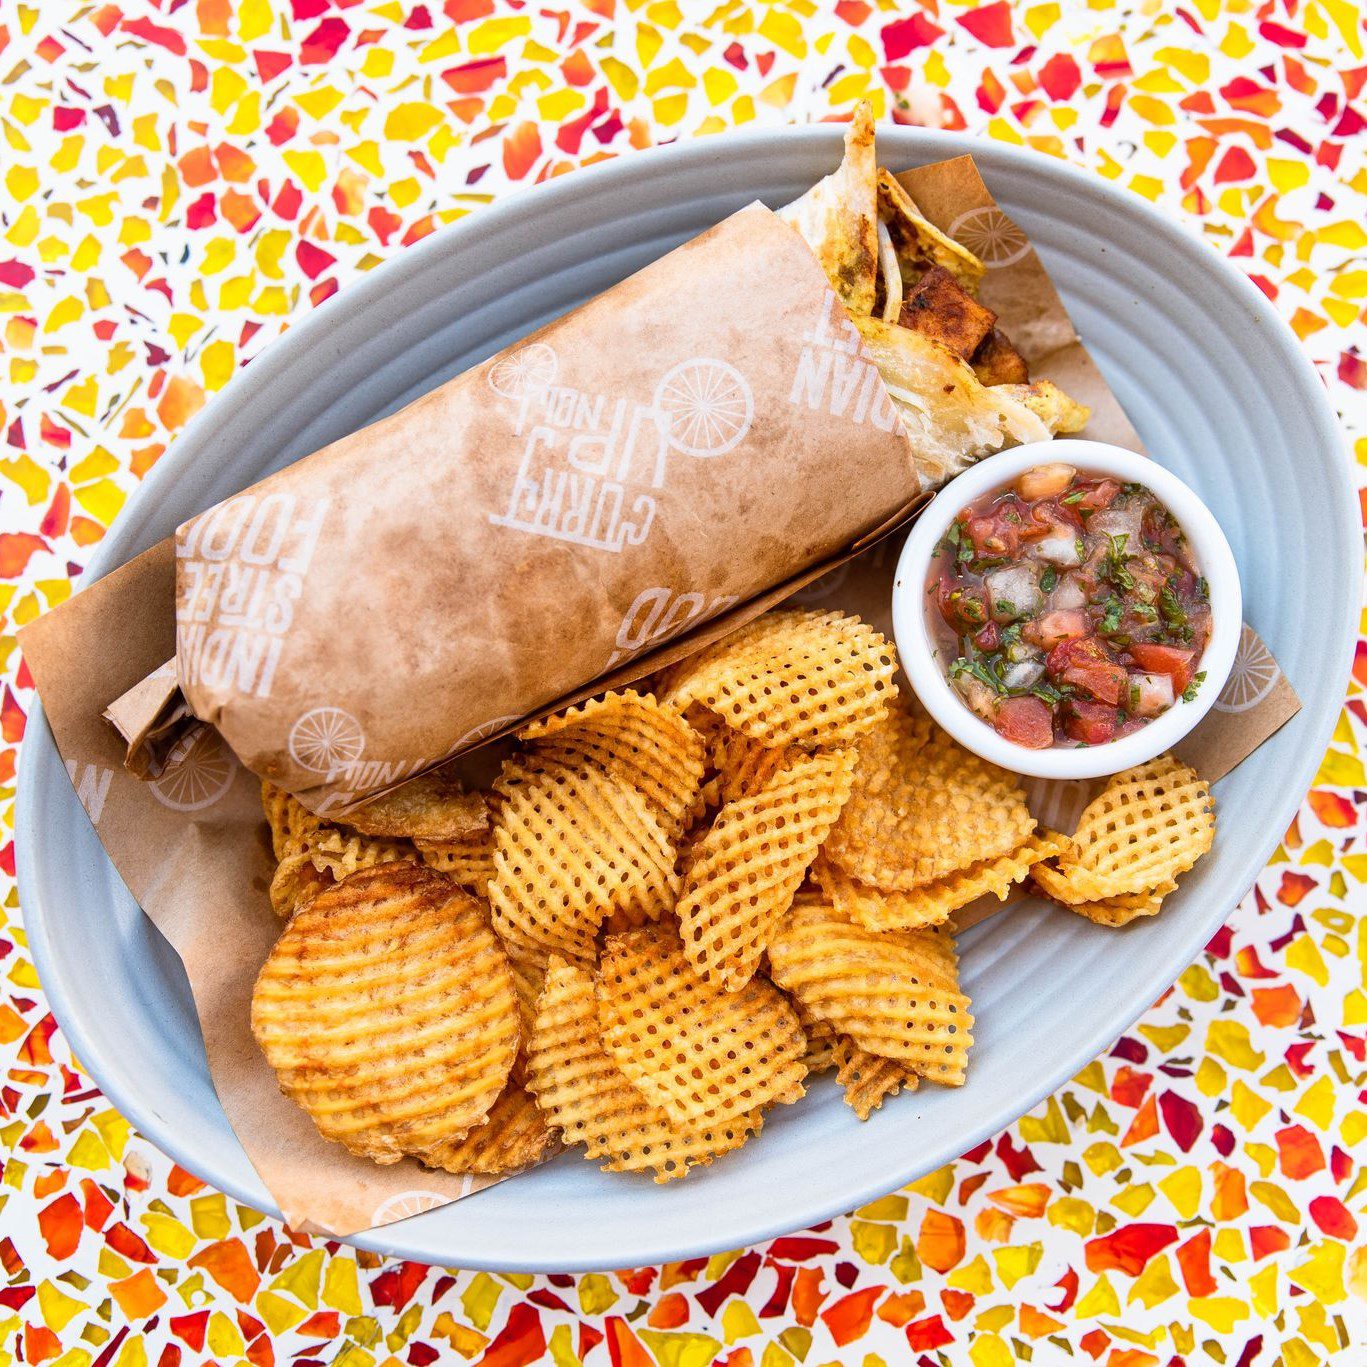 indian food franchise wrap and fries with chips on plate sitting onto of colorful tabletop